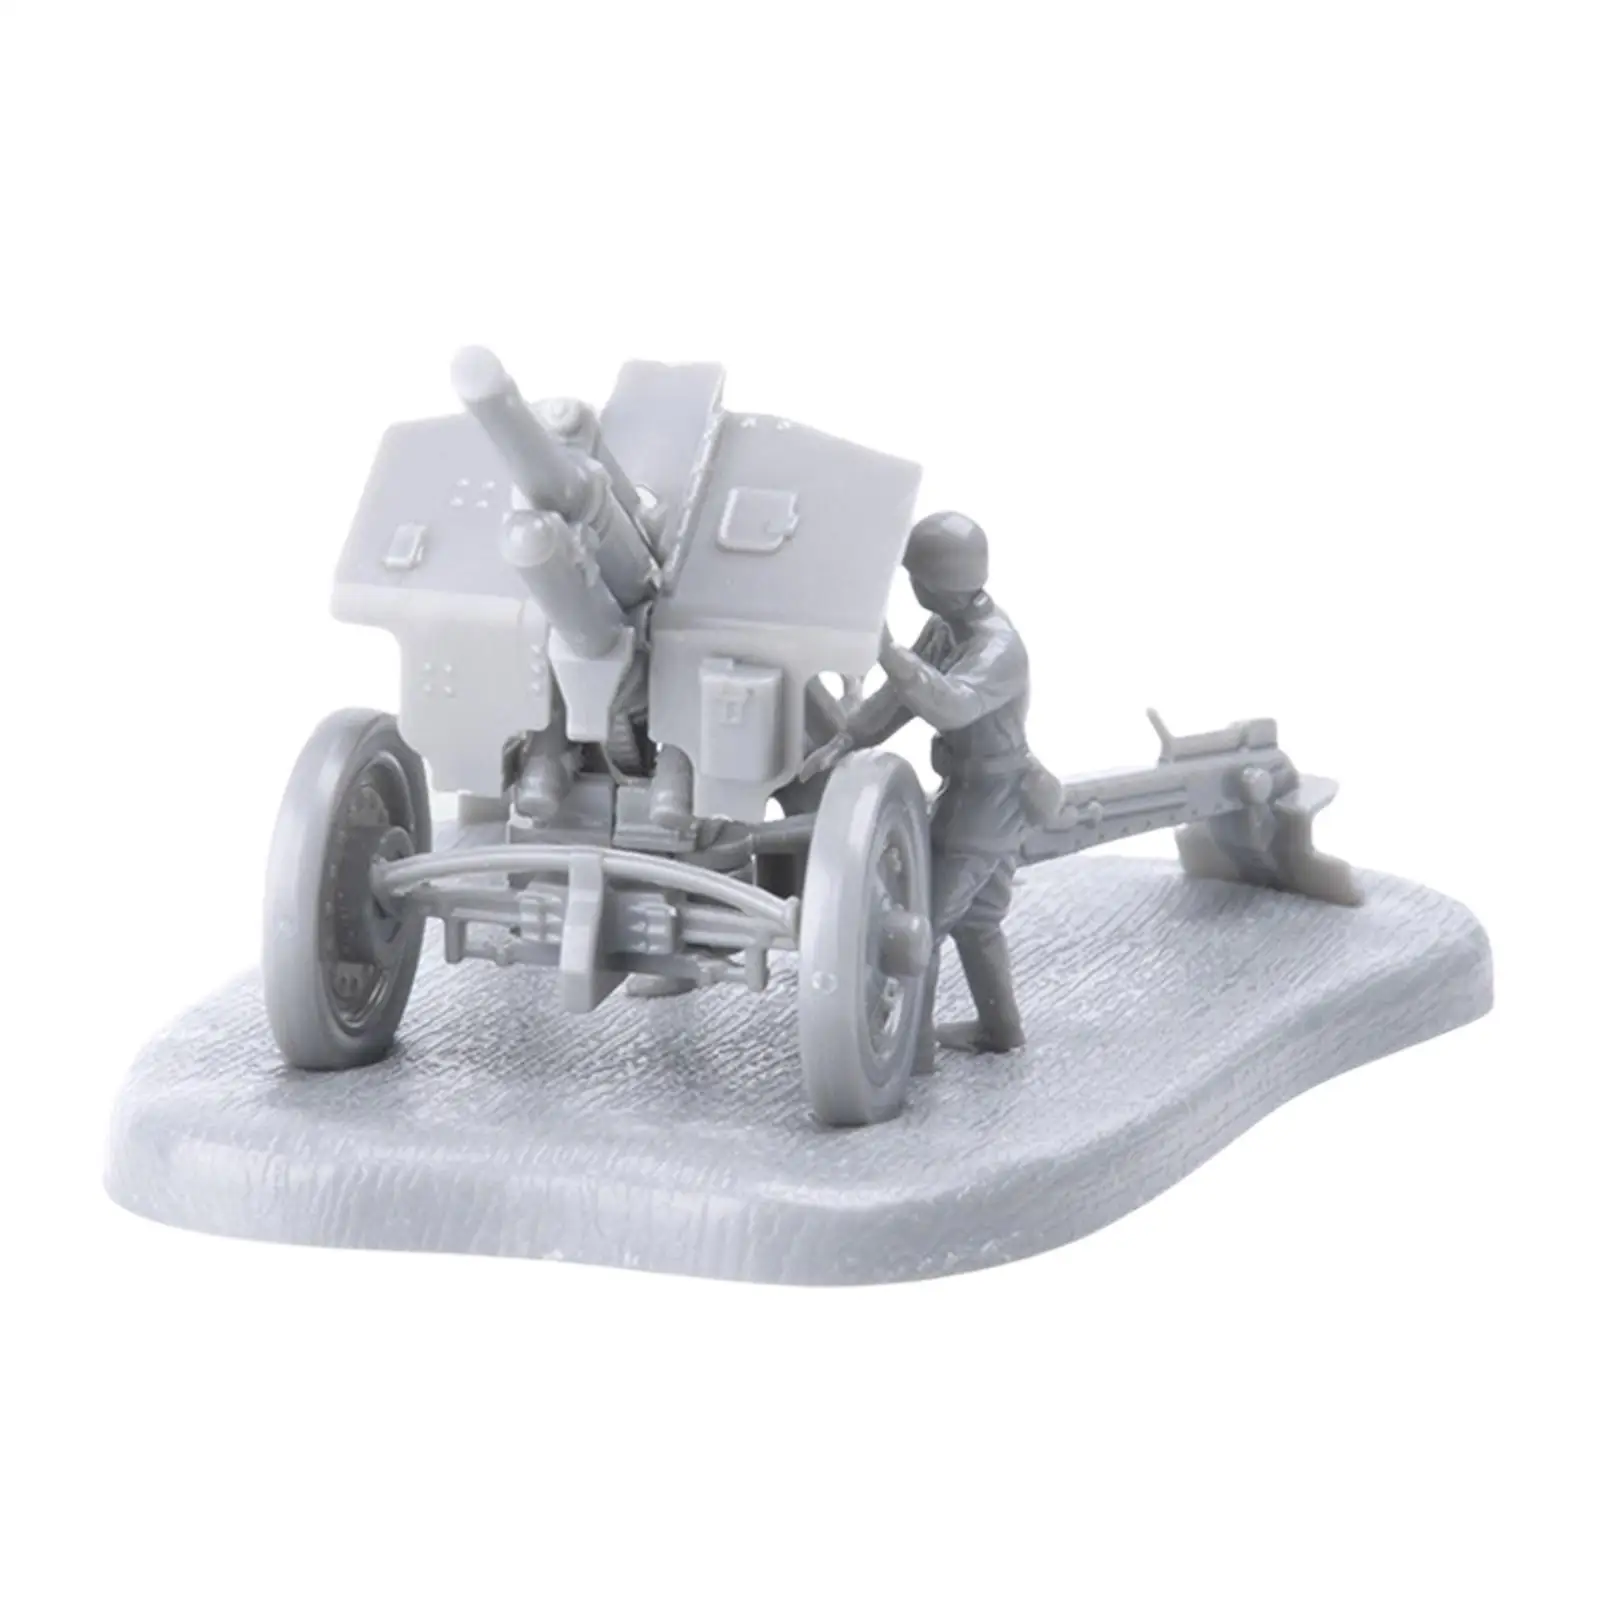 4D  1:72 Scale M1938 Soviet   Assembly Model Toy DIY Assemble by  Family Decorations Holiday Gifts Children Gifts